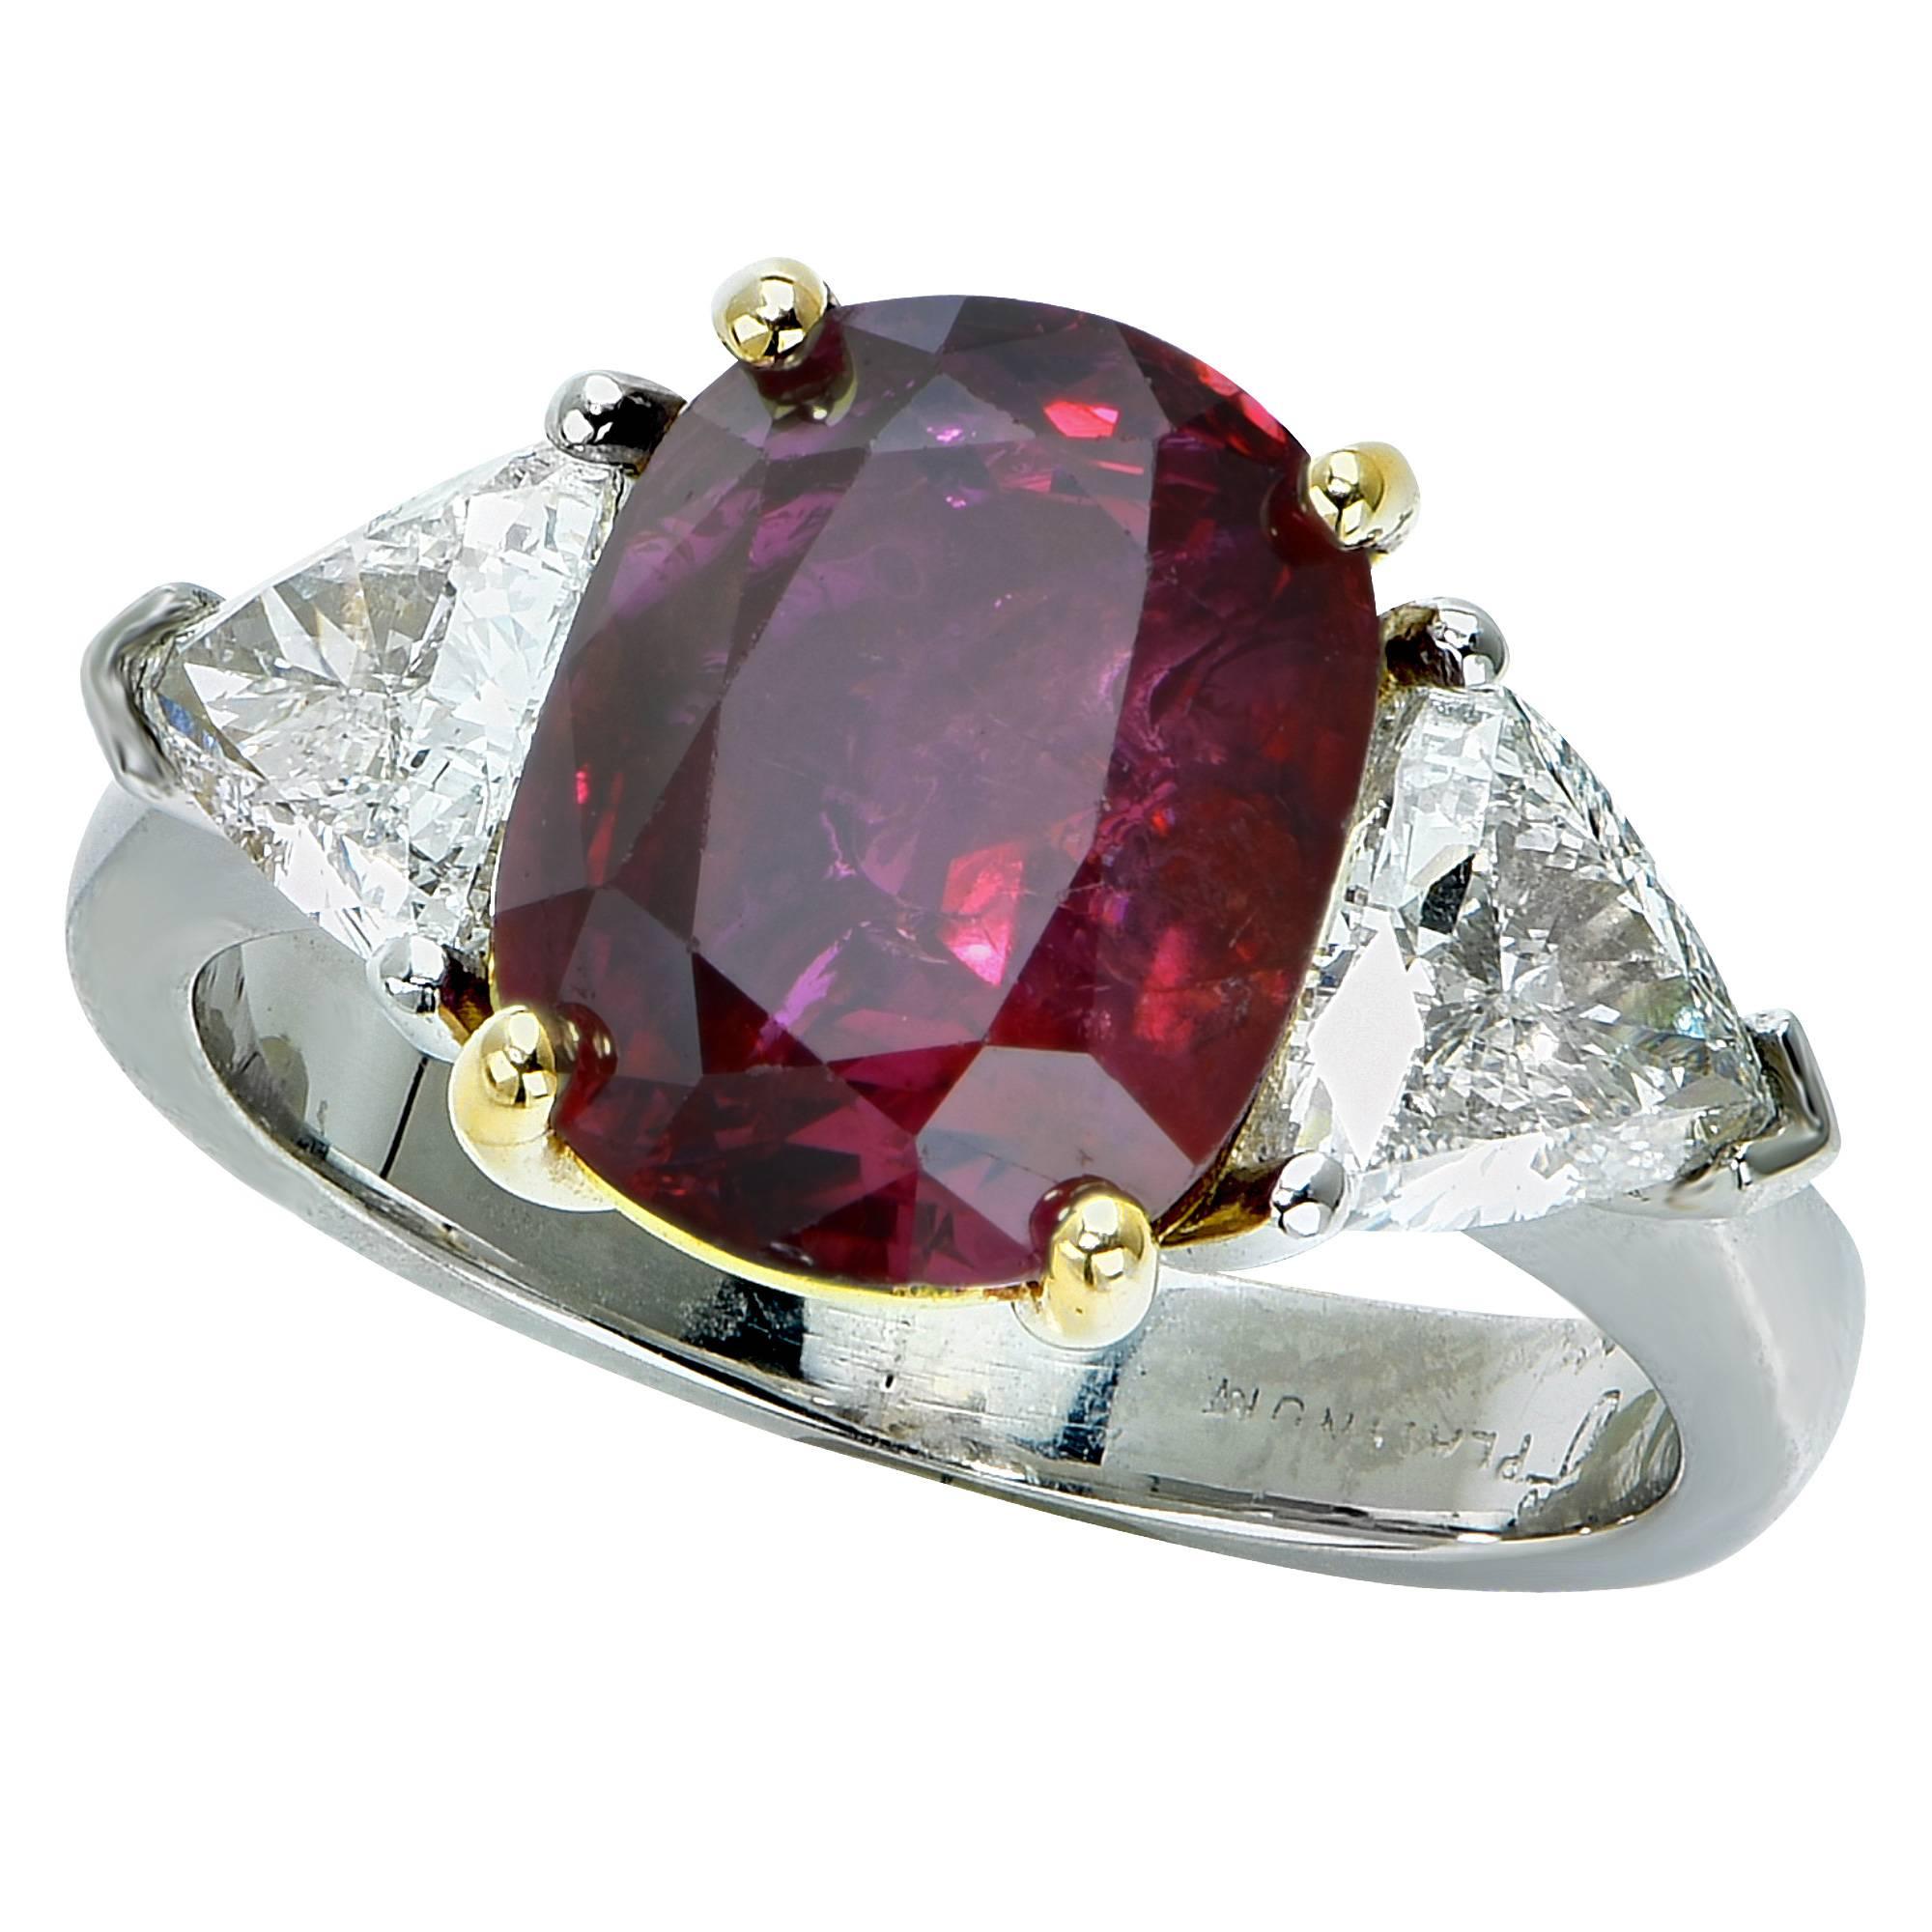 Spectacular engagement ring crafted in platinum and 18 karat yellow gold, showcasing a sensational GIA Certified unheated cushion cut ruby weighing 5 carats, accompanied by two trilliant cut diamonds weighing approximately 1.40 carats total. This